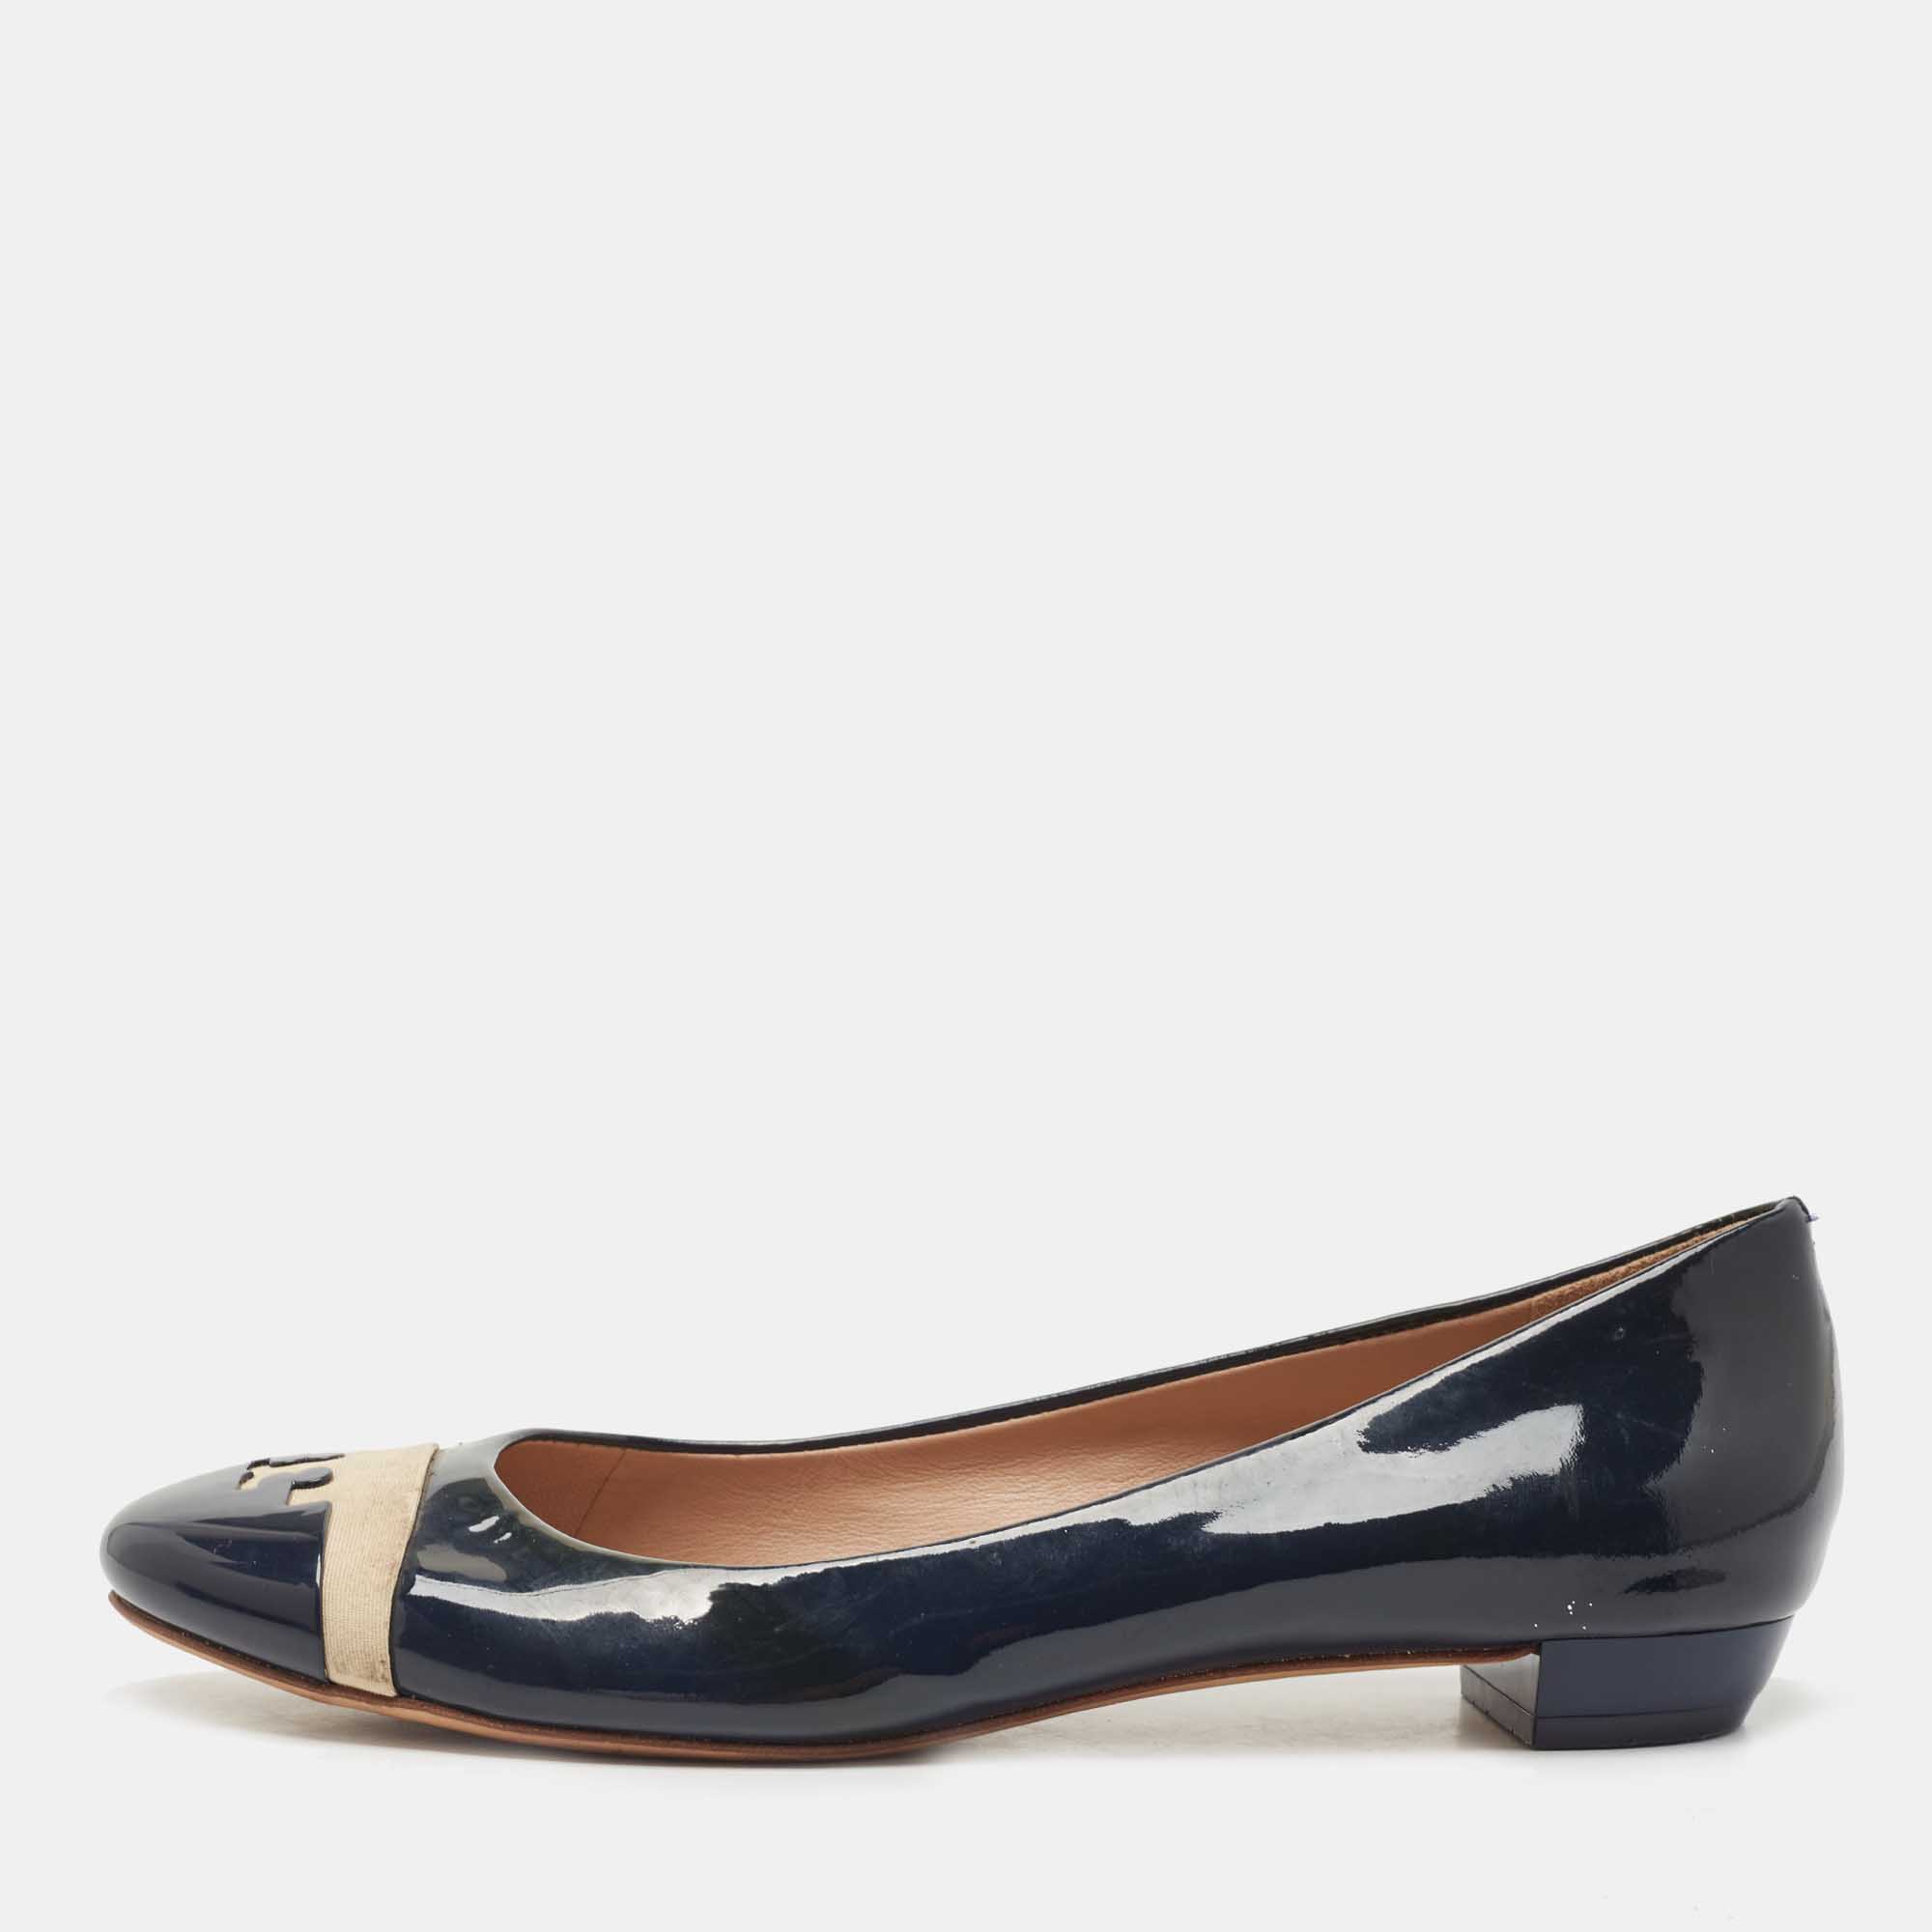 Tory Burch Navy Blue Patent Leather Gabrielle Ballet Flats Size 37.5